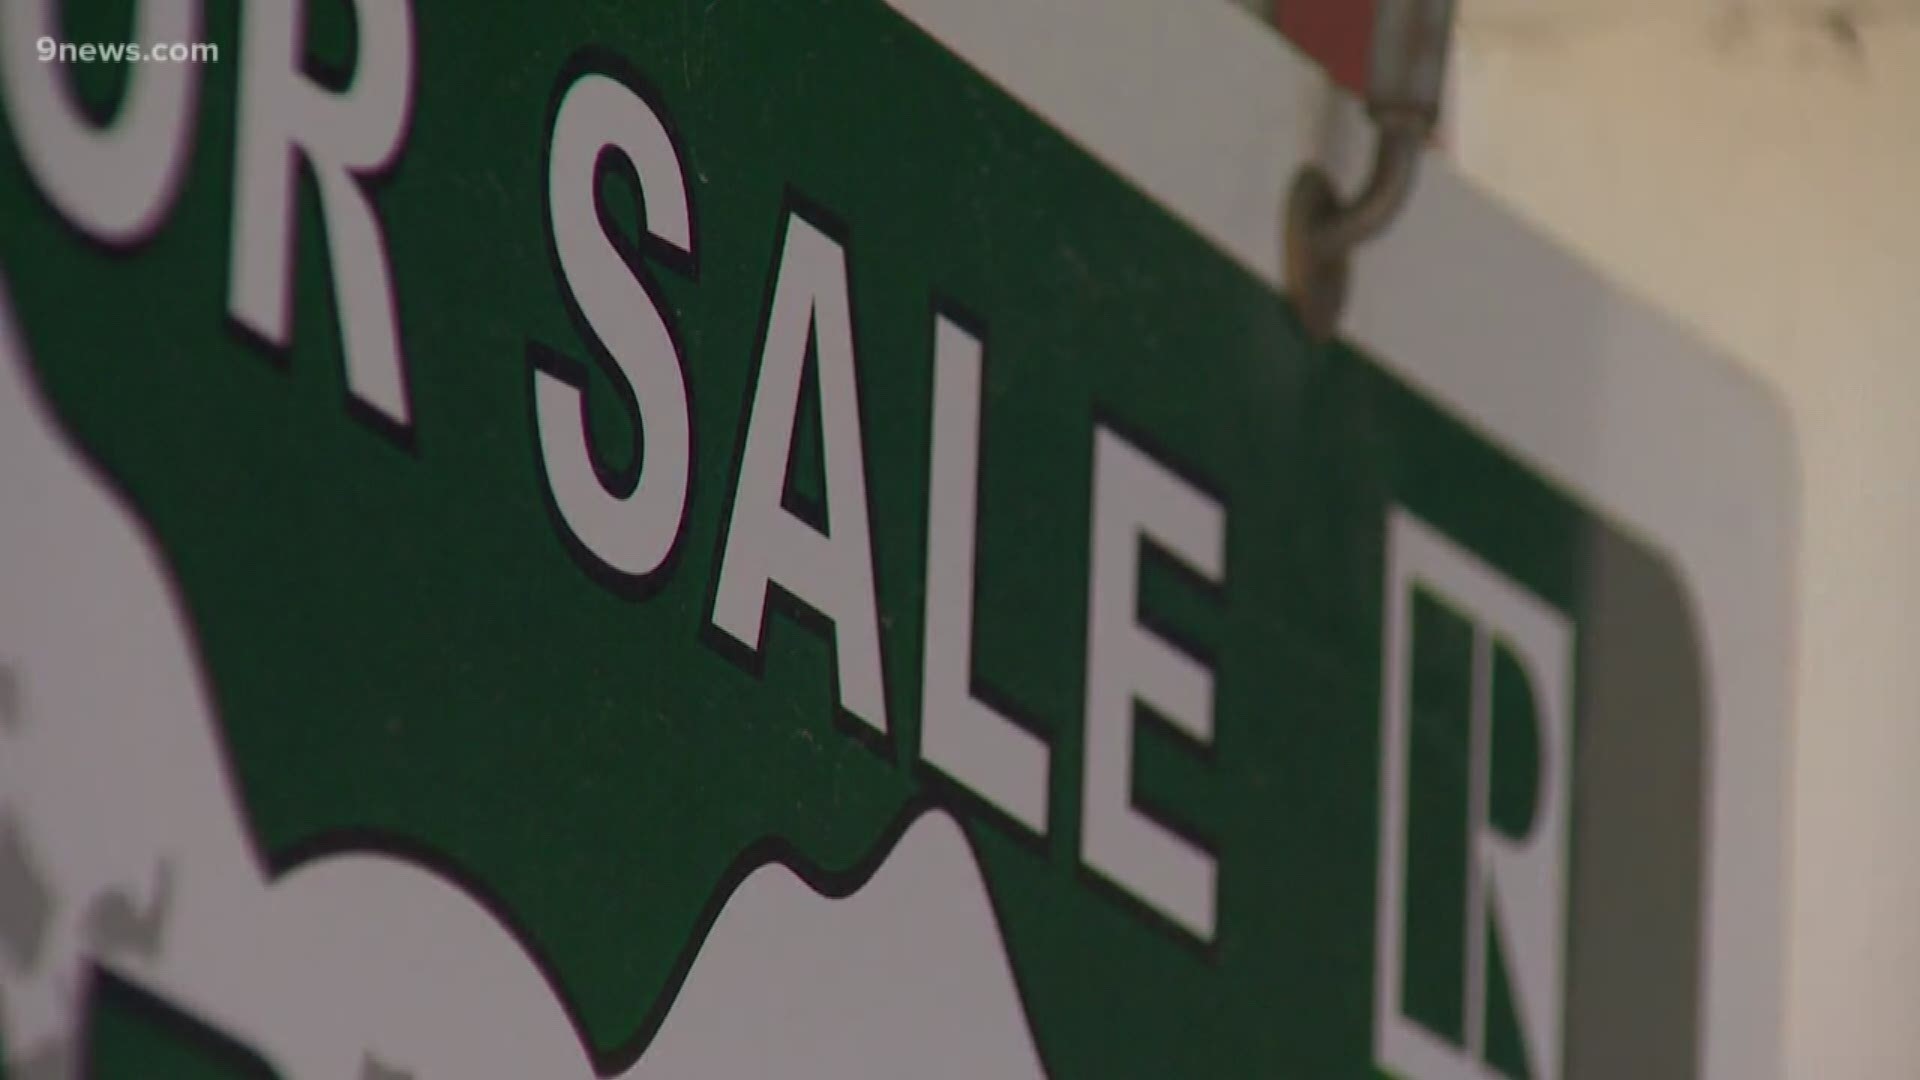 Real estate is considered essential, but showings are down, and REALTORS and others are taking extra precautions.